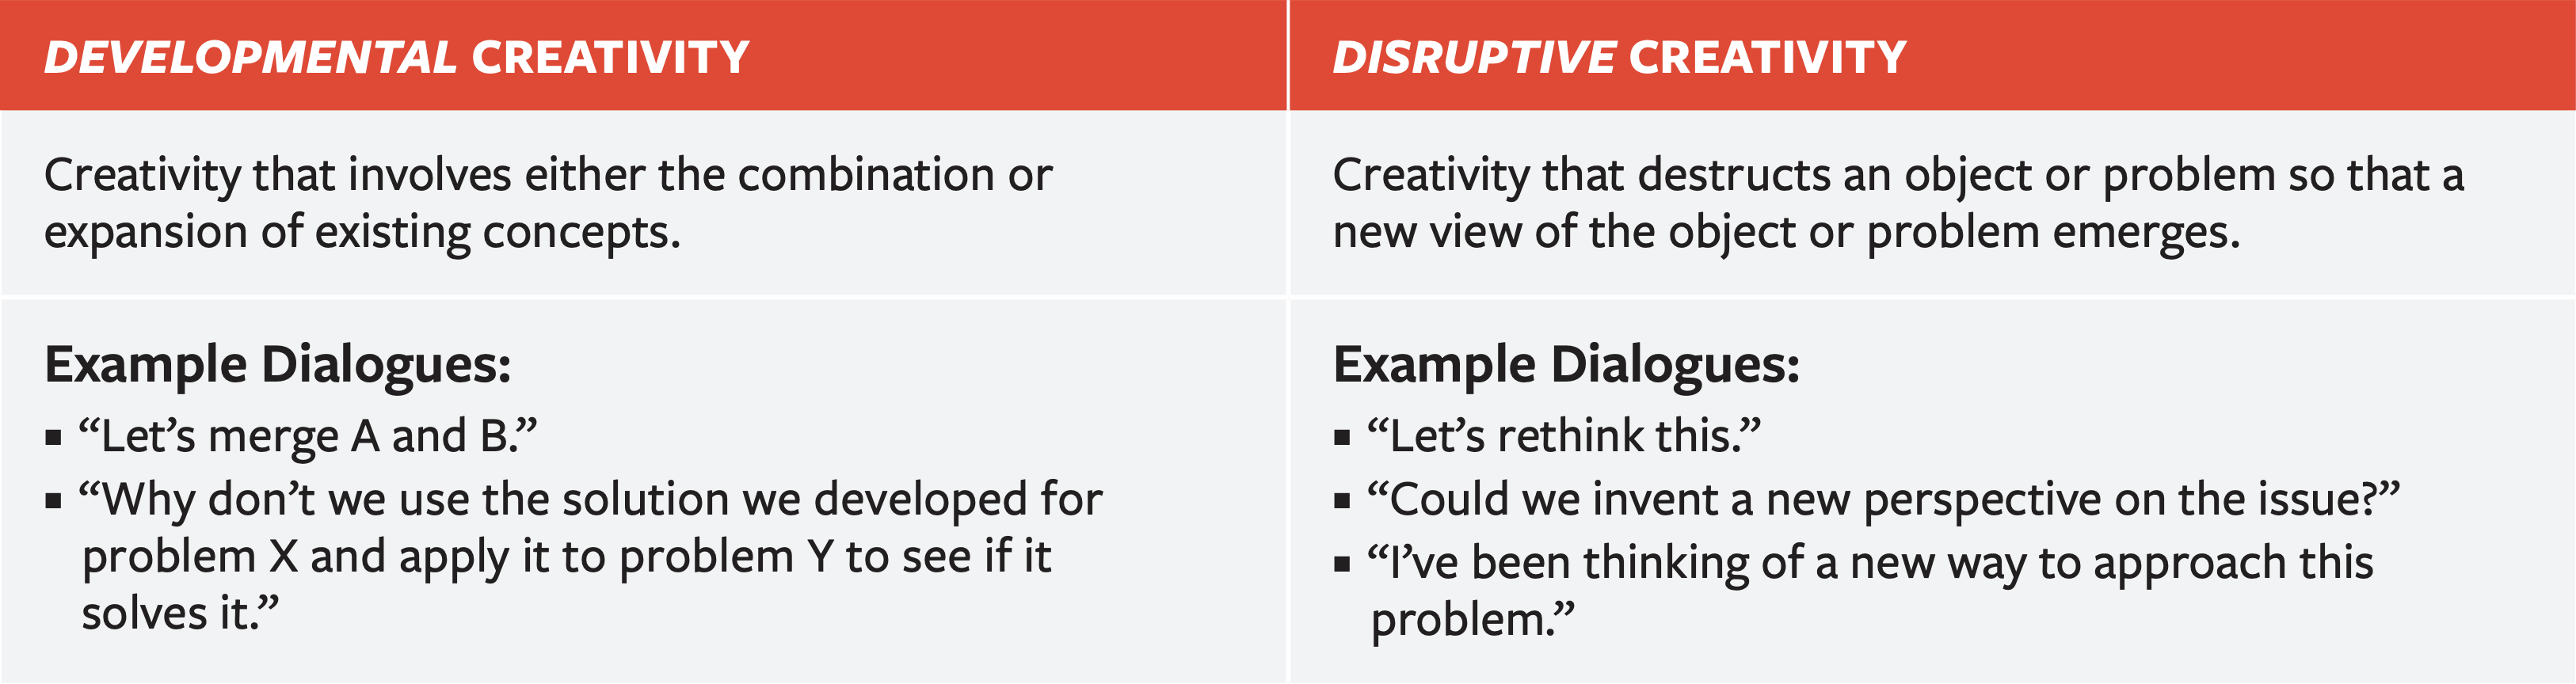 Two Types of Creativity in Digital Collaboration